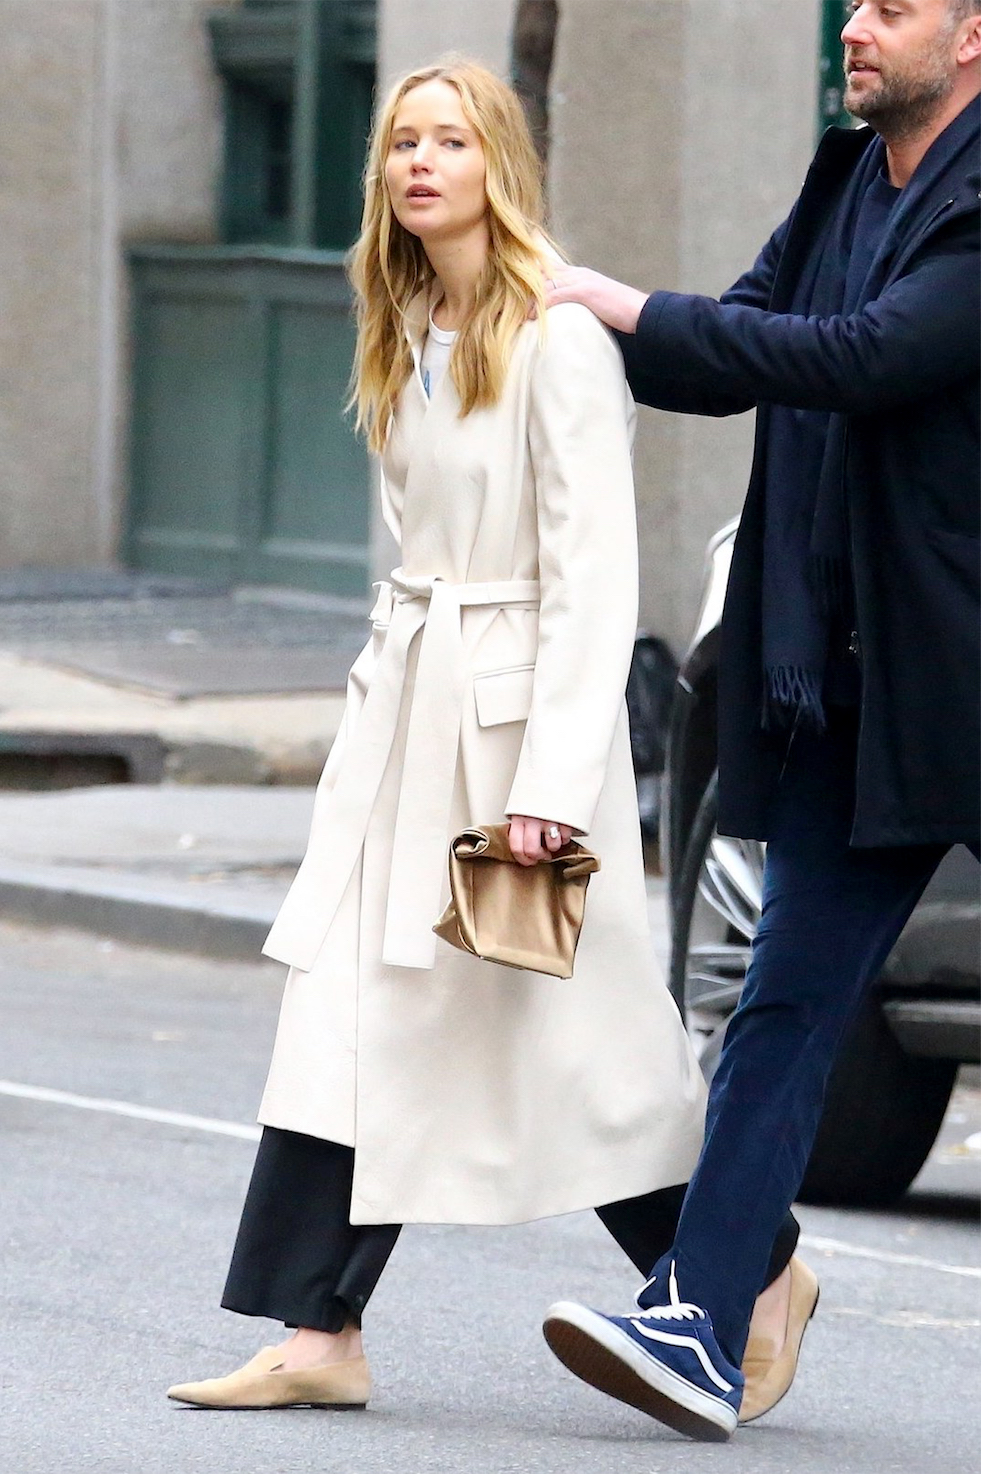 Jennifer Lawrence Is a Dream in This Elevated Minimalist Outfit